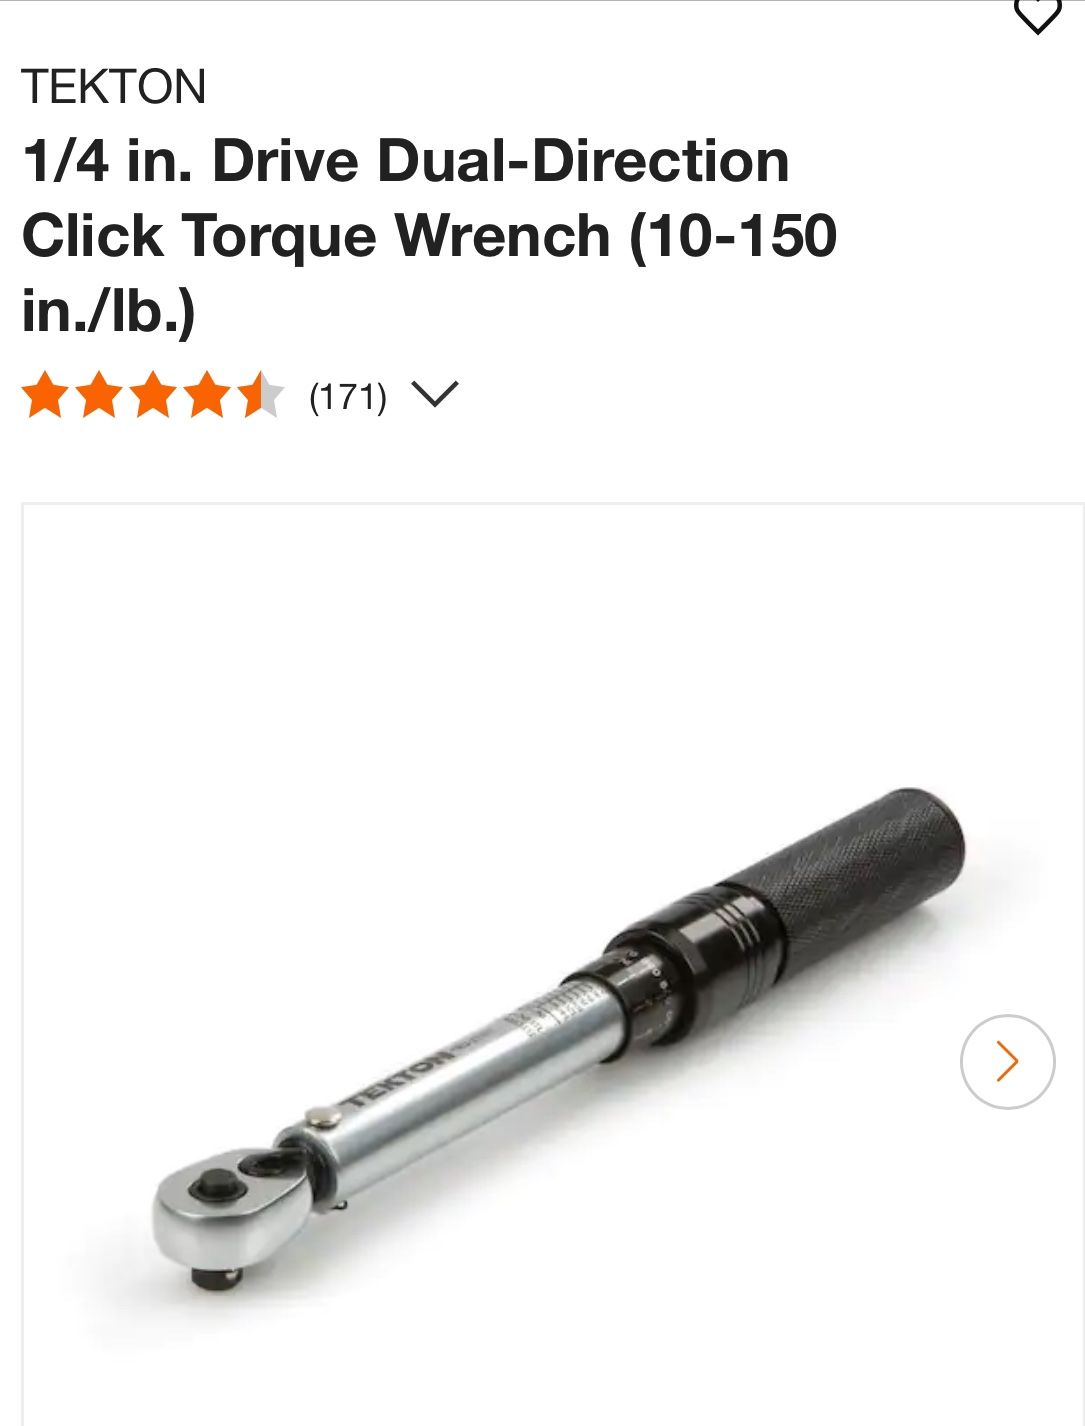 TEKTON 1/4 in. Drive Dual-Direction Torque Wrench